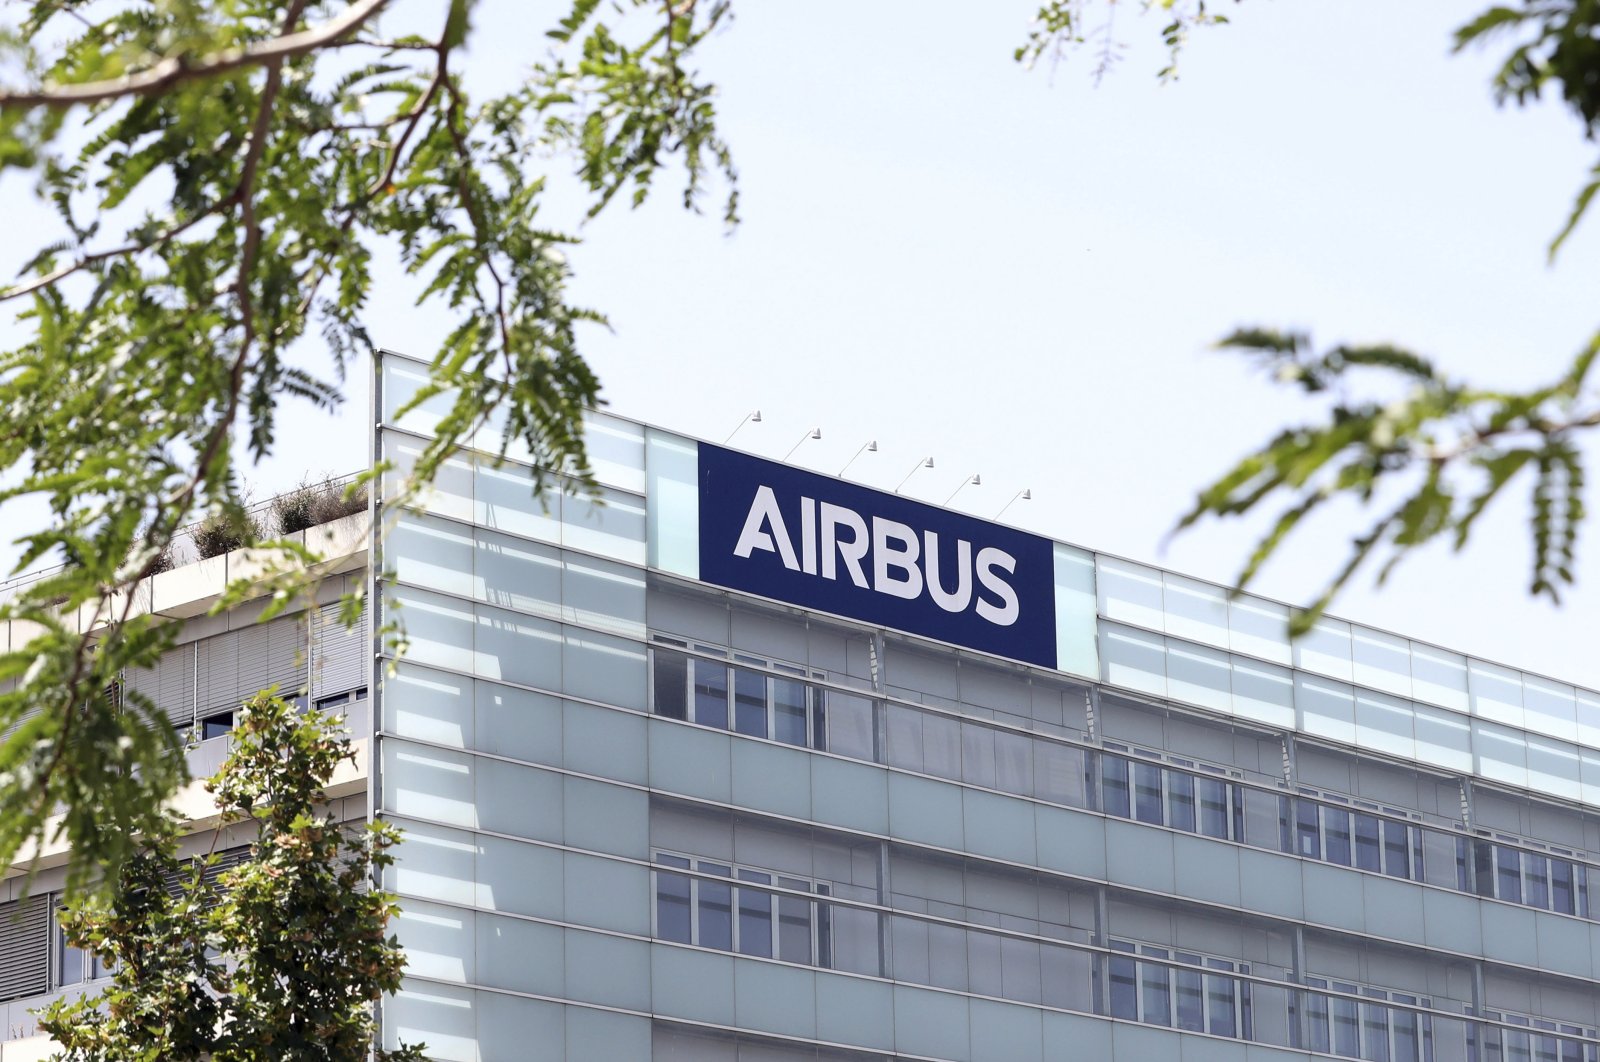 The logo of Airbus group is displayed in Toulouse, south of France, July 9, 2020. (AP Photo)